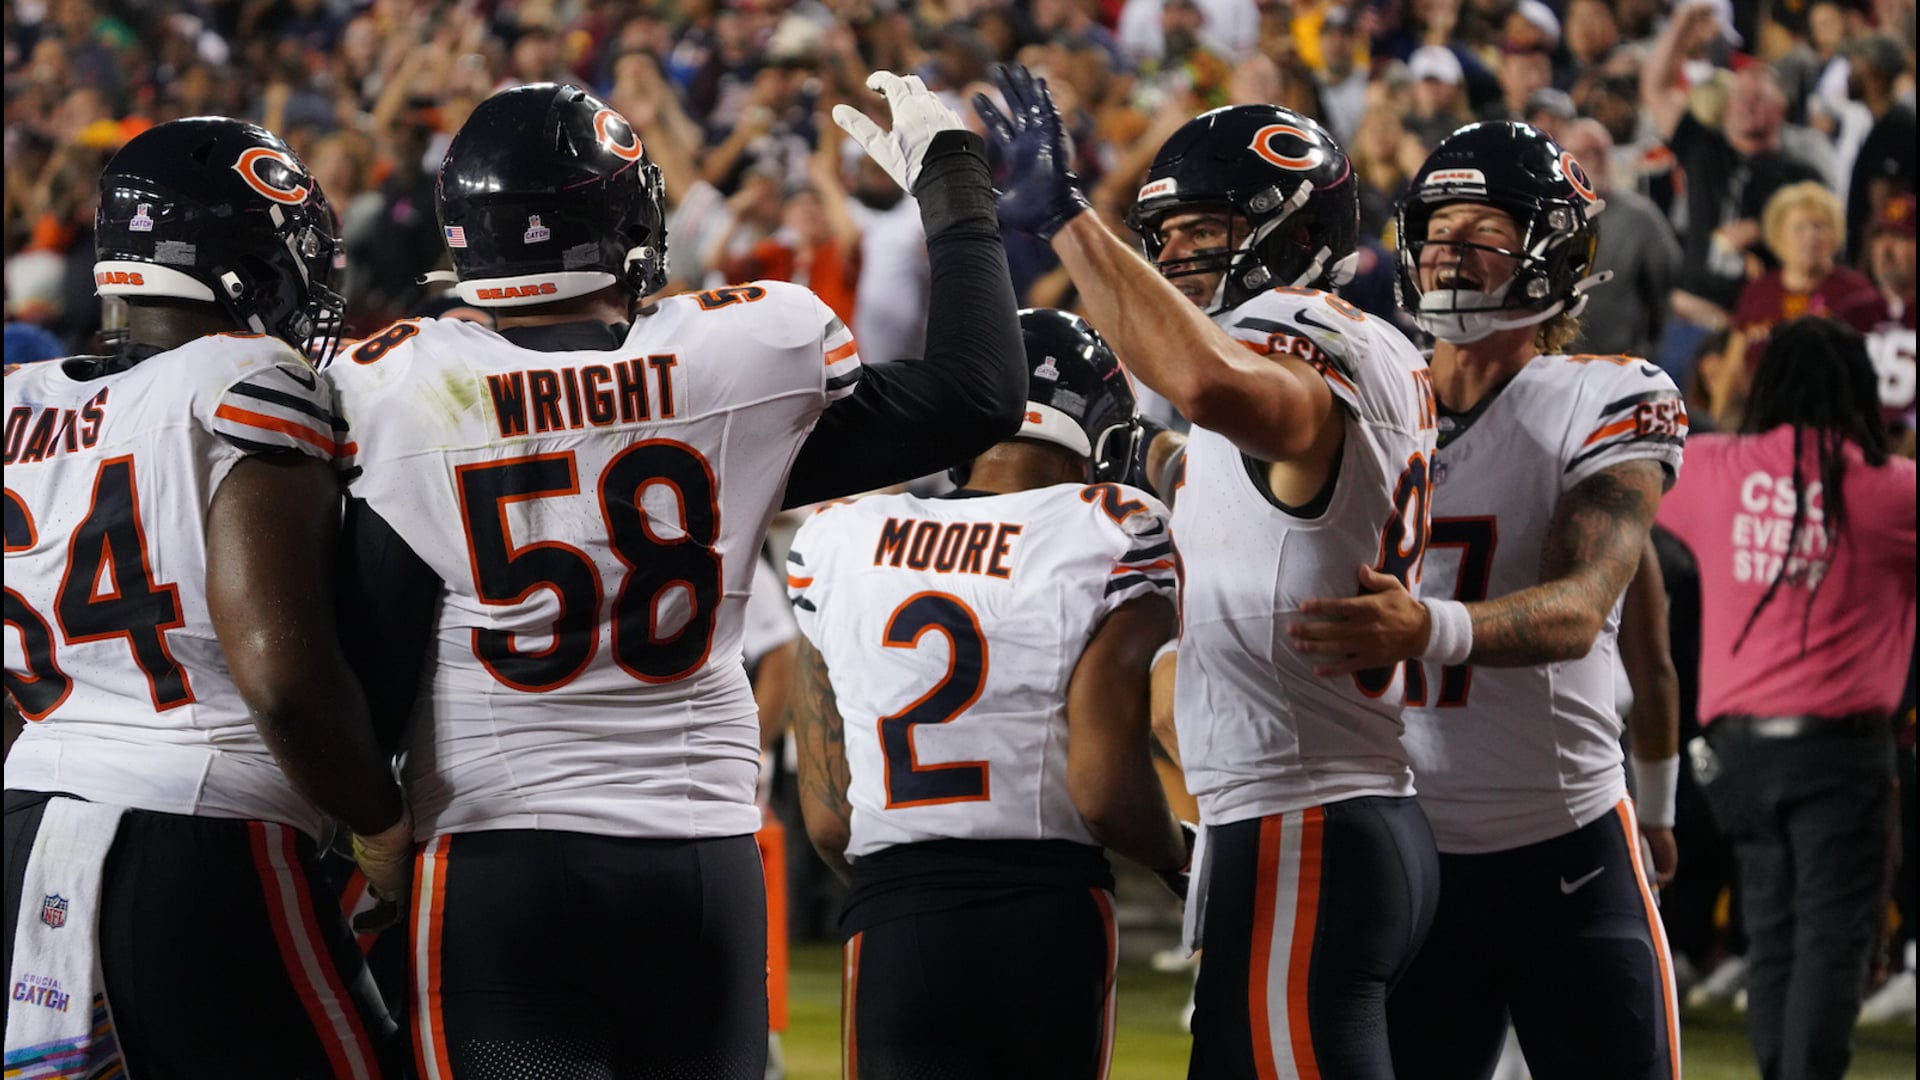 Bears Offensive Huddle Orange Uniforms - Marquee Sports Network